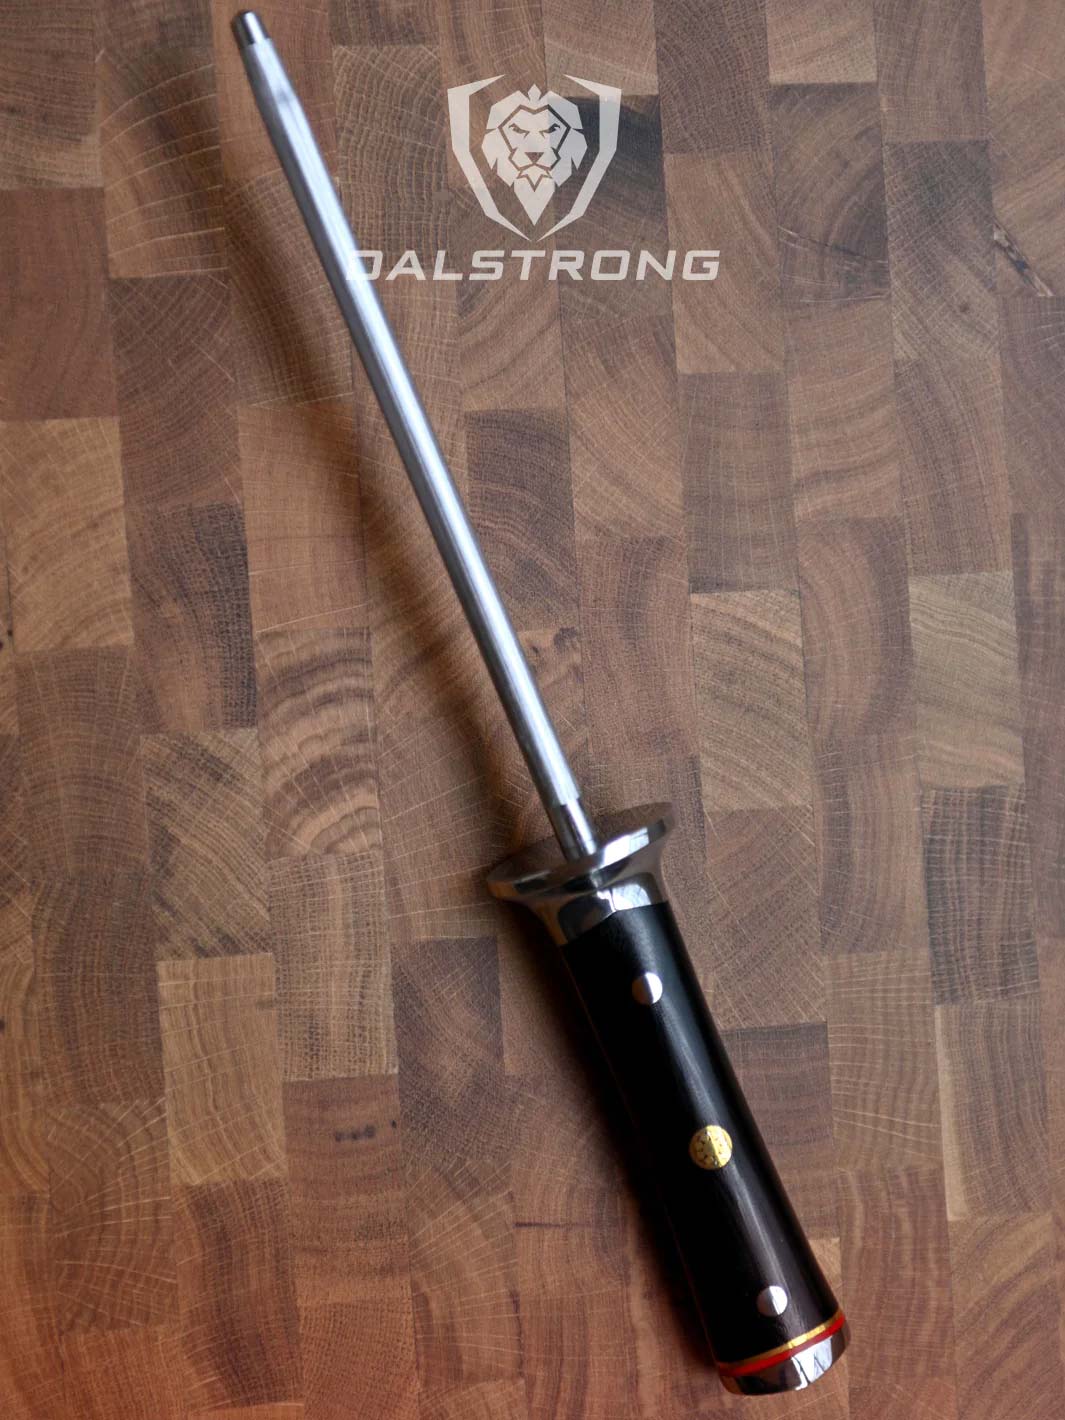 Dalstrong centurion series 8 inch honing steel with black handle on a cutting board.